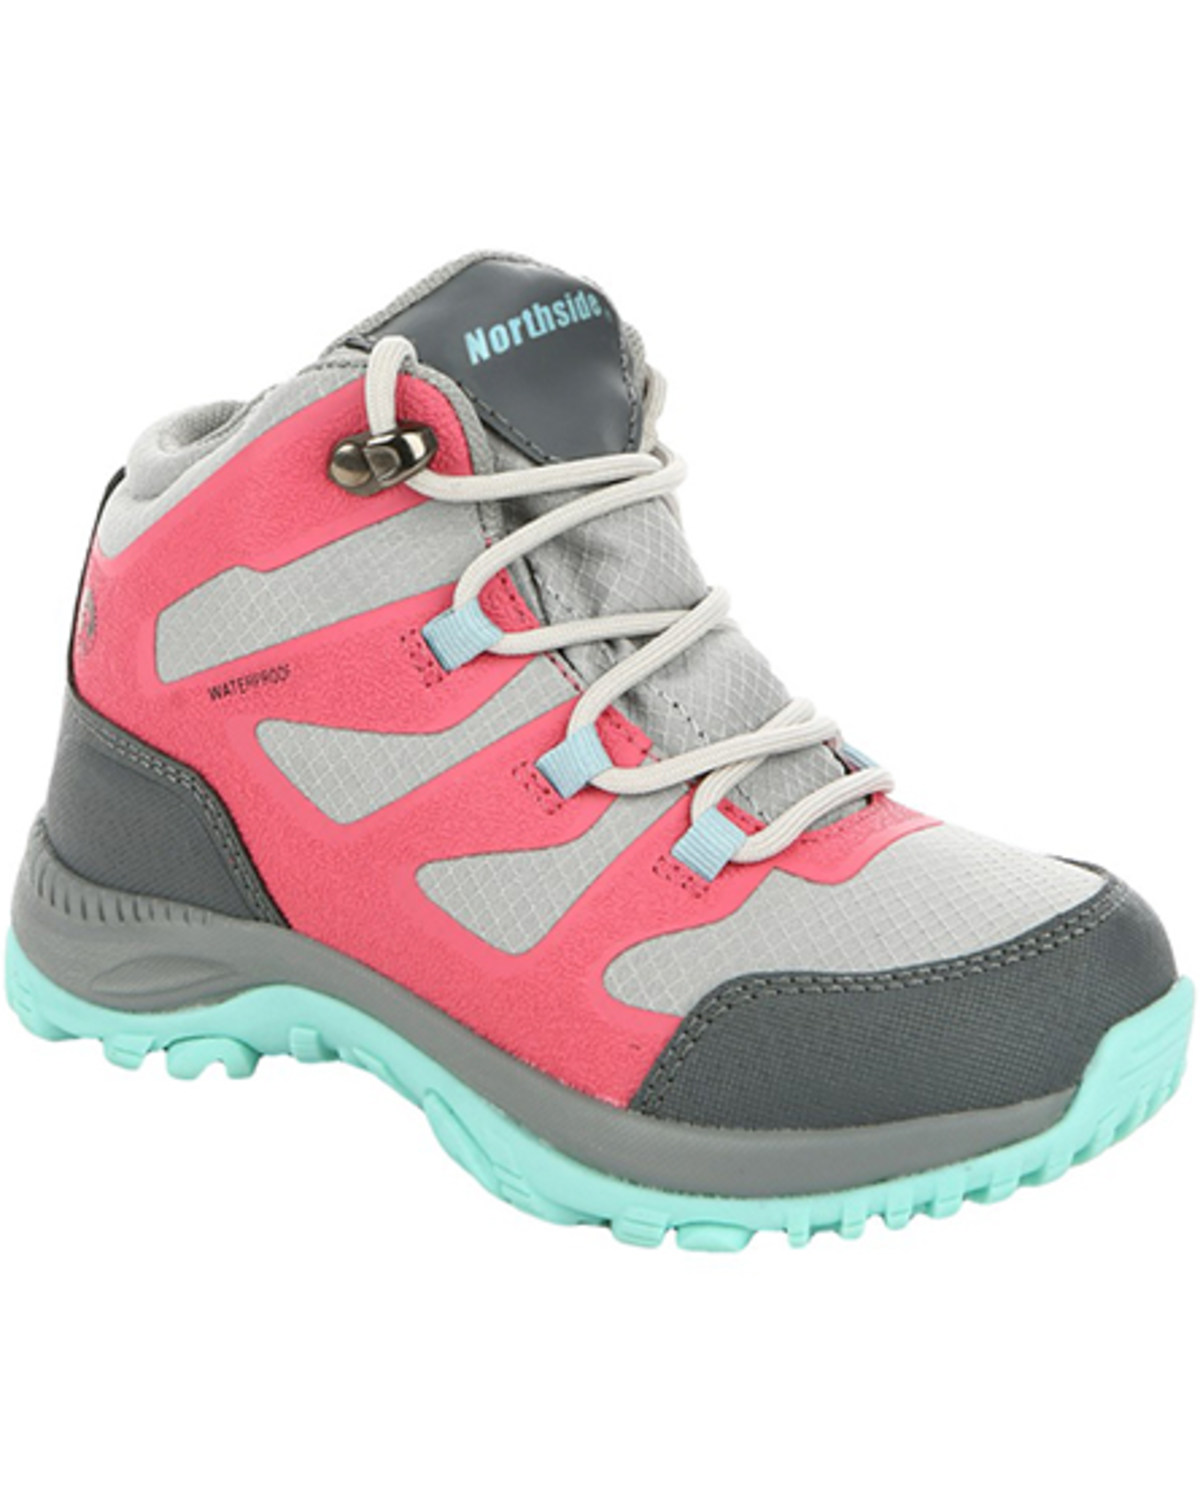 Northside Girls' Hargrove Mid Lace-Up Waterproof Hiking Boots